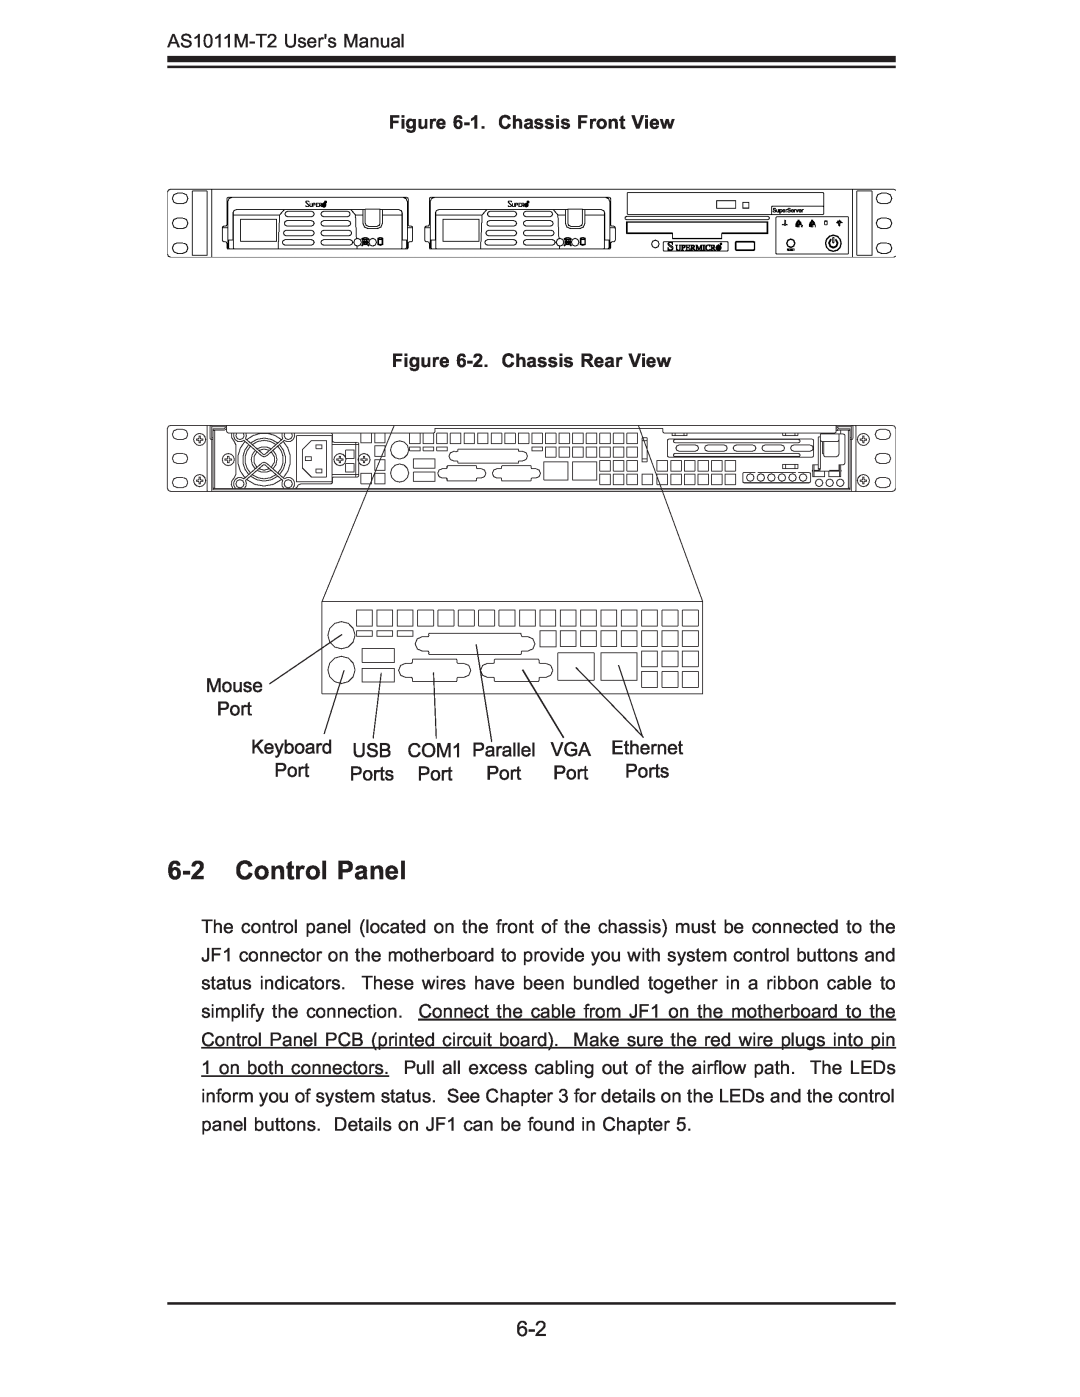 SUPER MICRO Computer AS1011M-T2 user manual Control Panel, 1. Chassis Front View -2. Chassis Rear View 